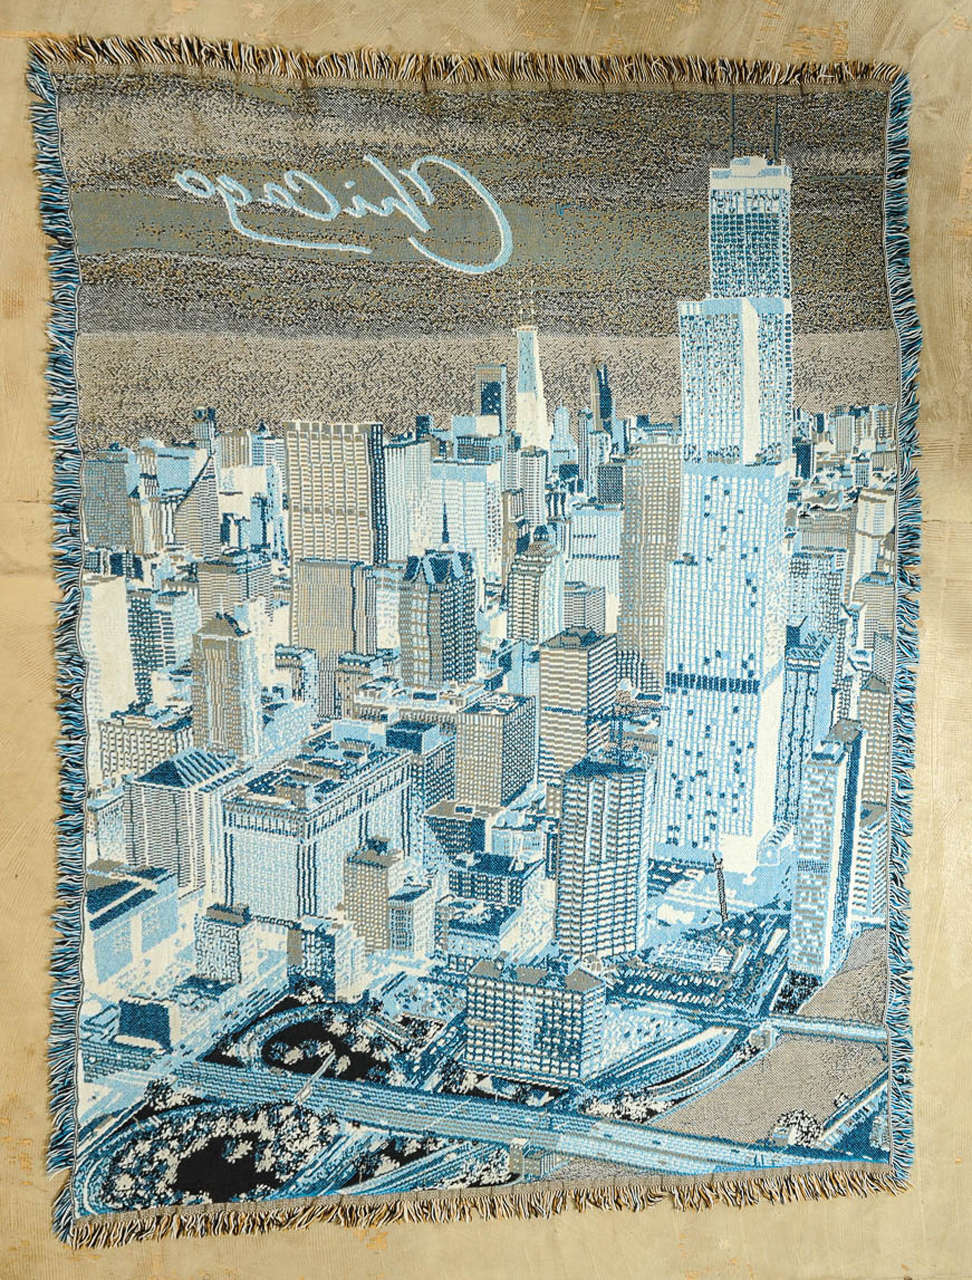 Plaid or Wall Hanging Depicting the Skyline of Chicago 1